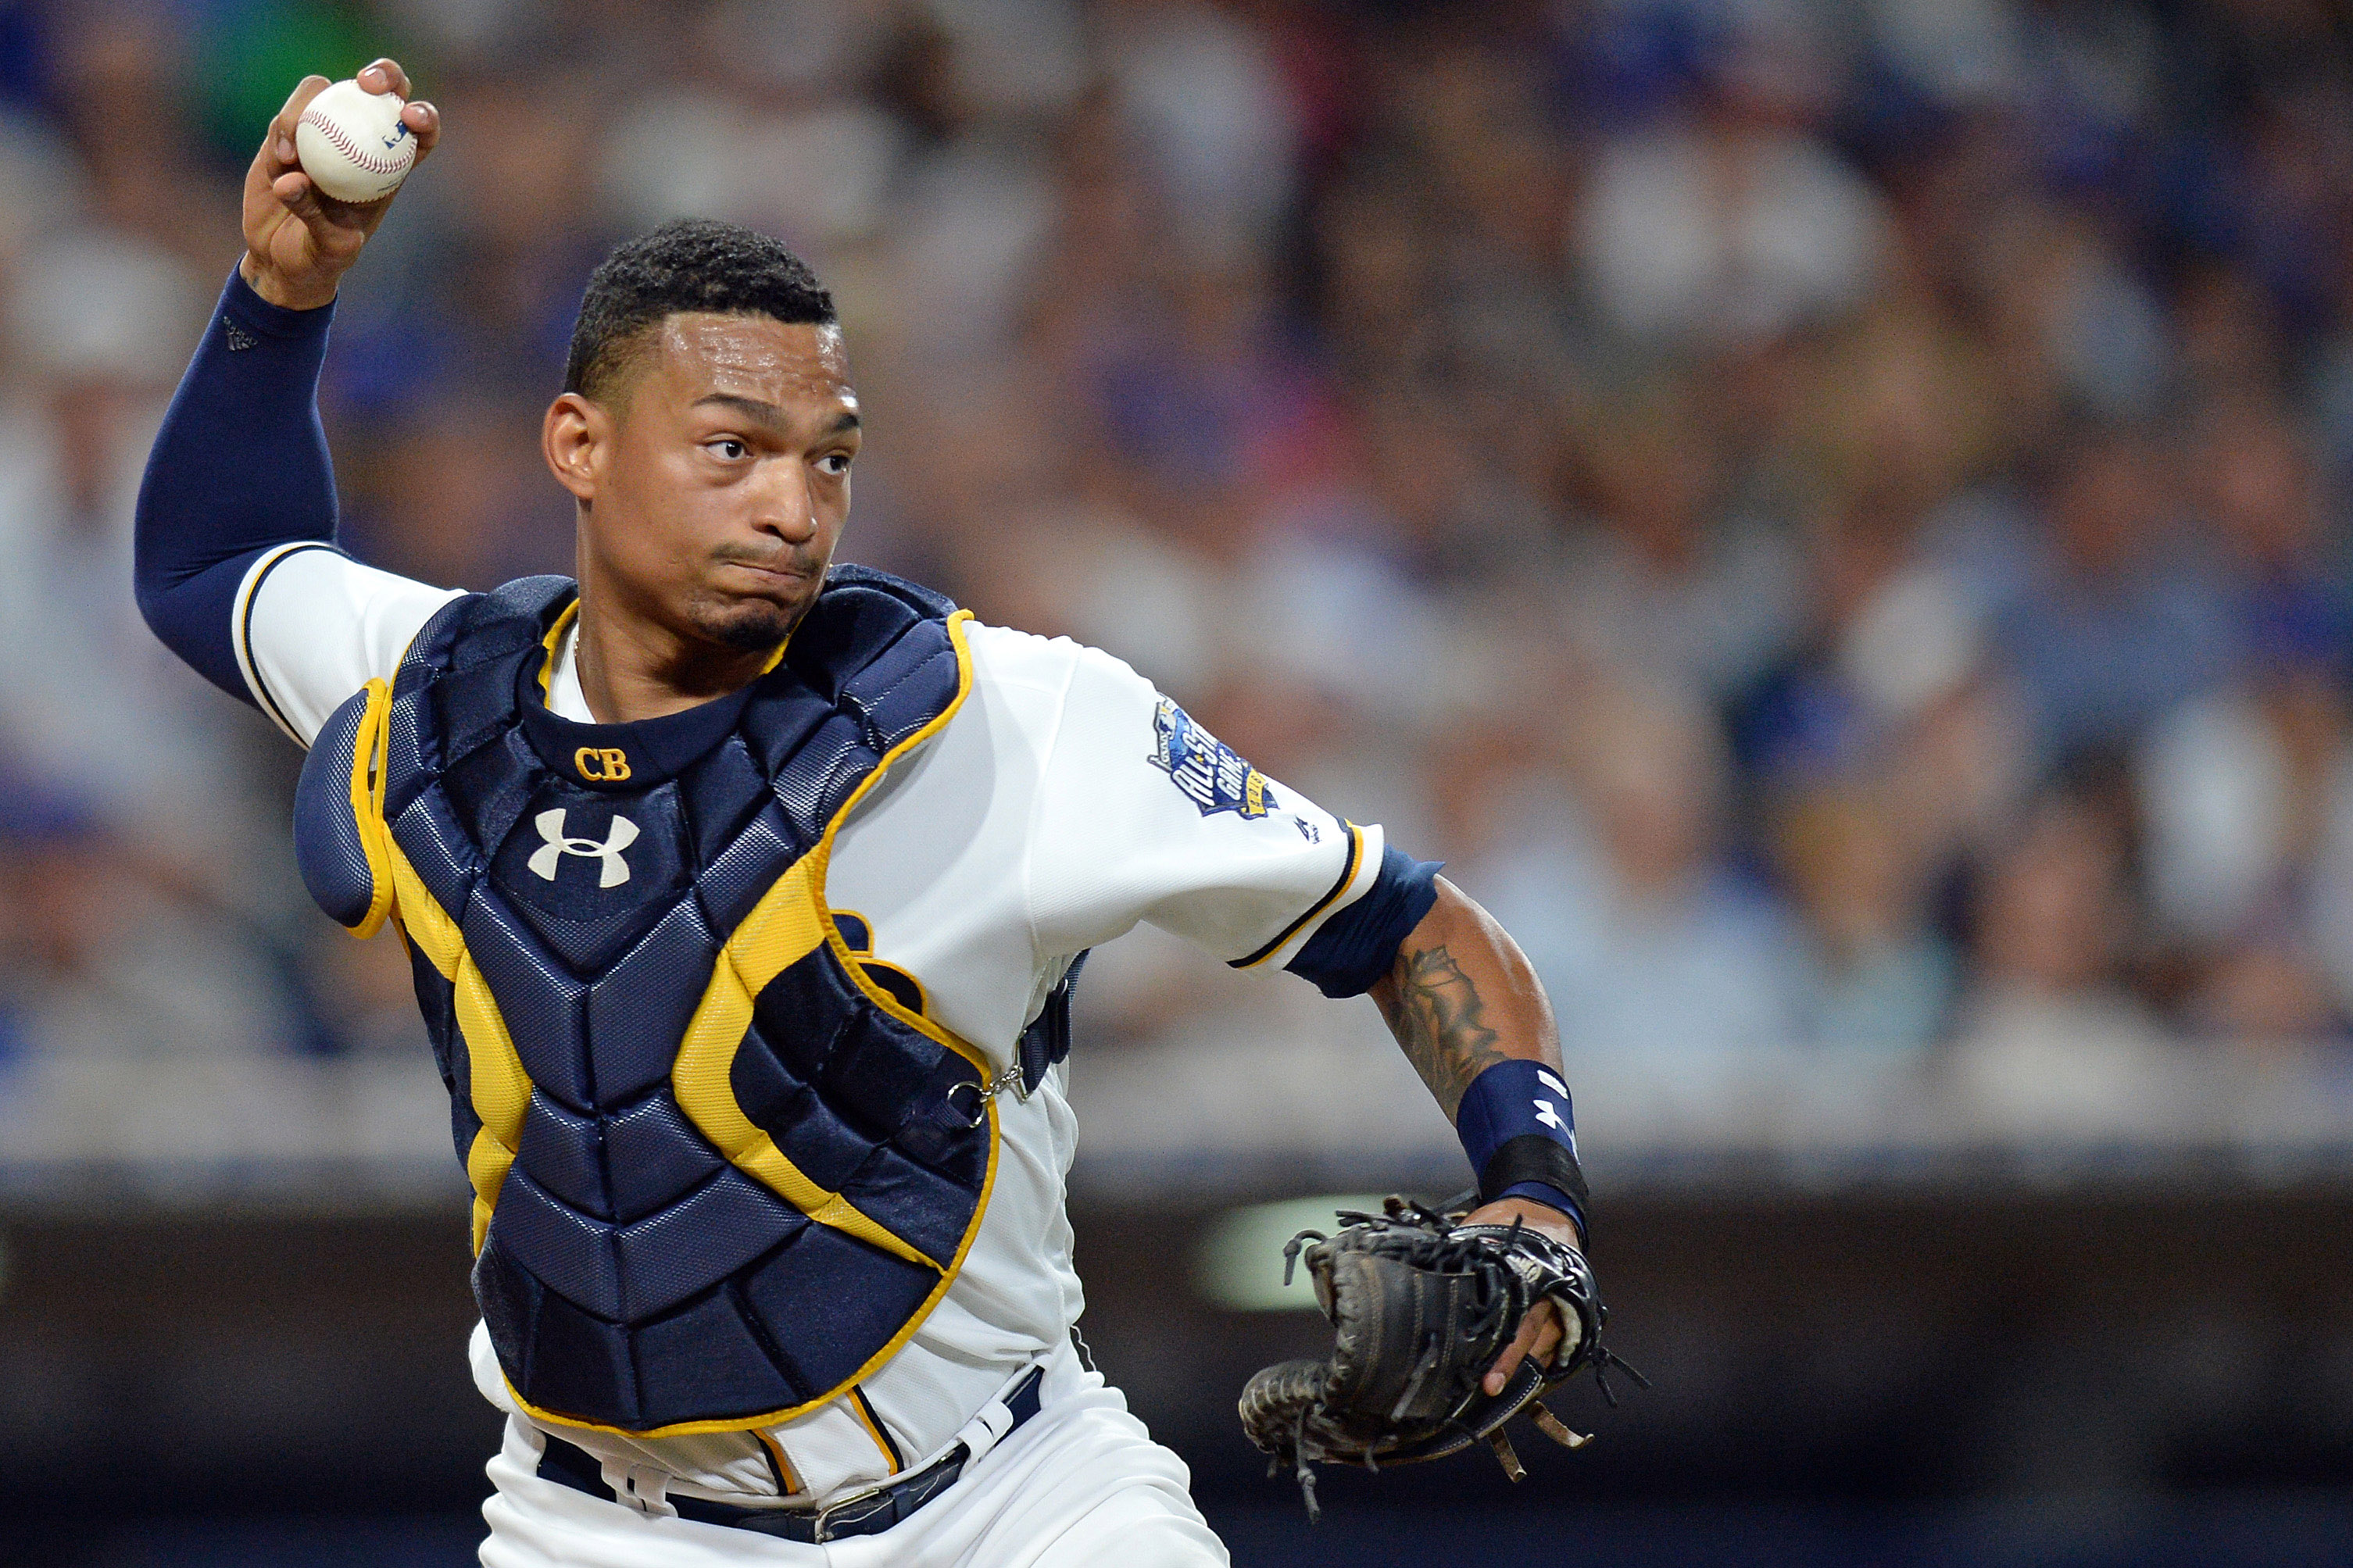 The Padres' plan to have Christian Bethancourt pitch and catch is  fascinating and awesome